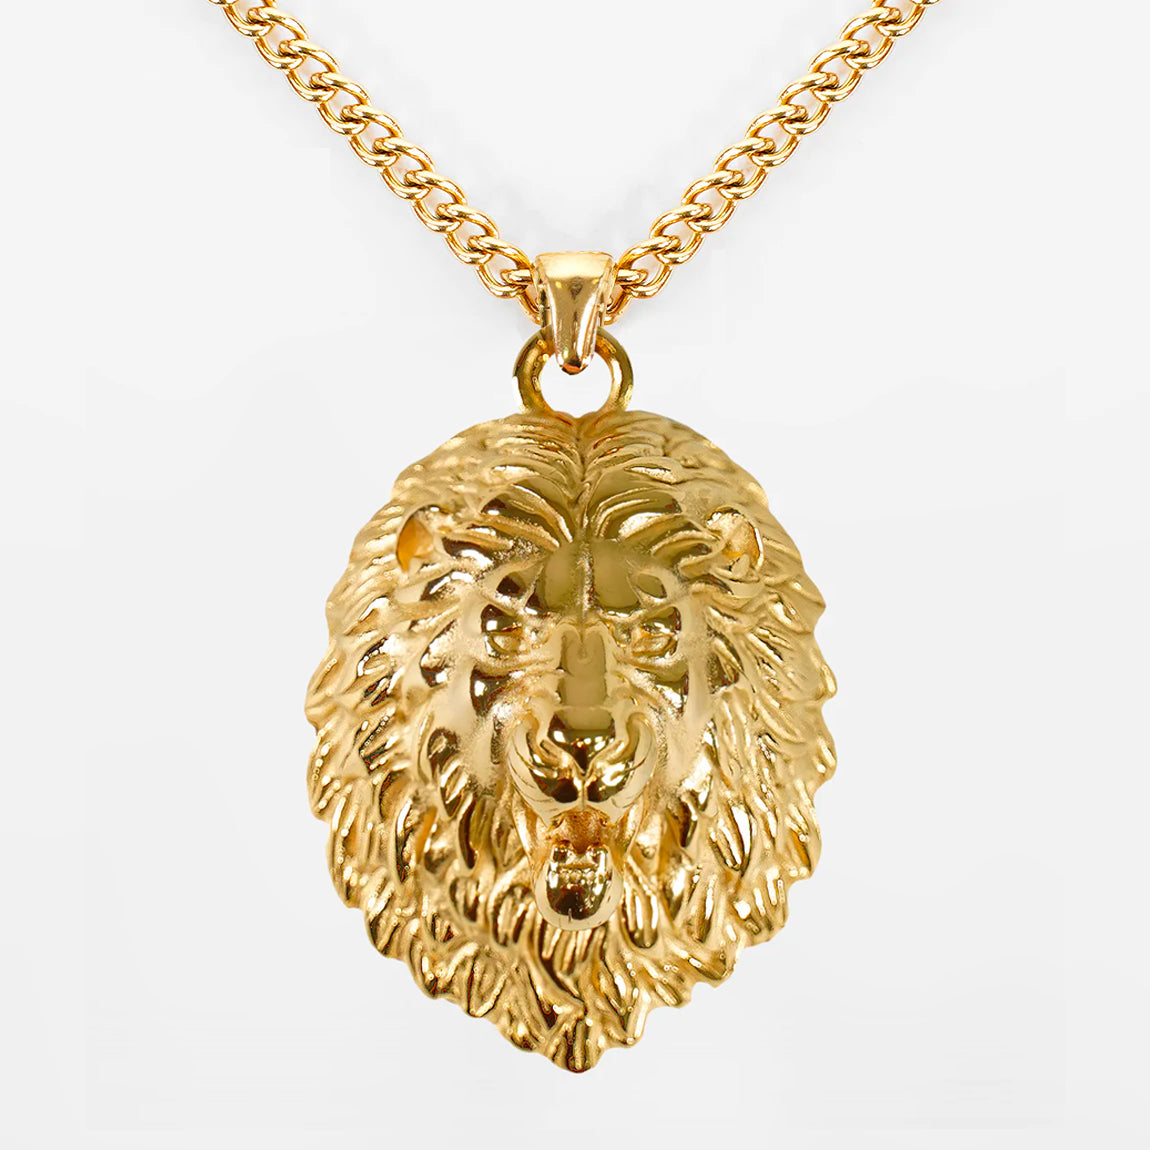 Lion Pendant with Chain Necklace - Gold Plated Stainless Steel